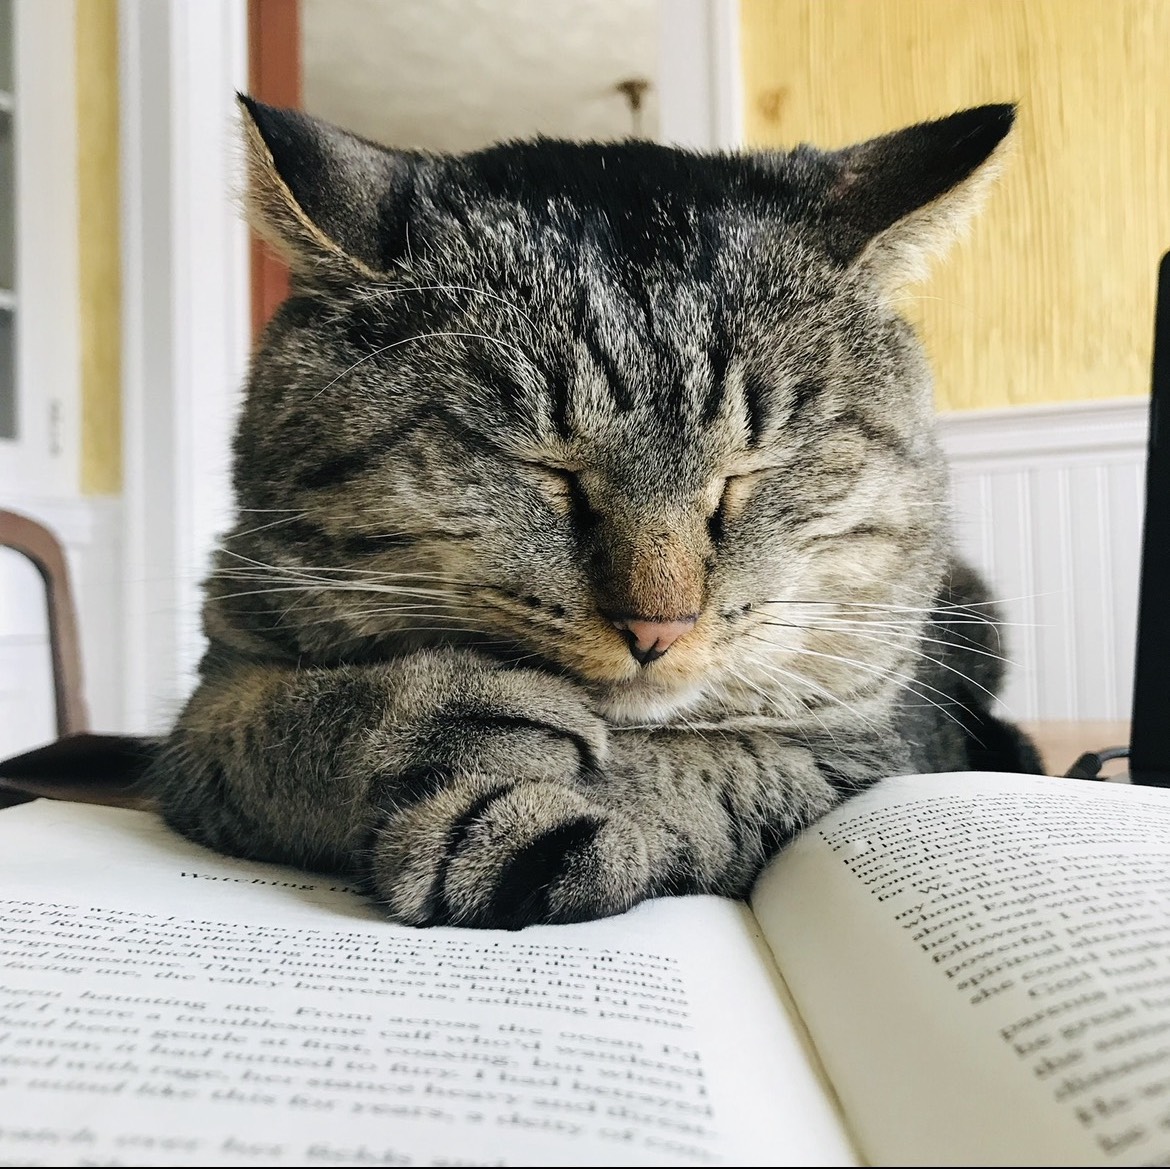 Cat cuddling up with book